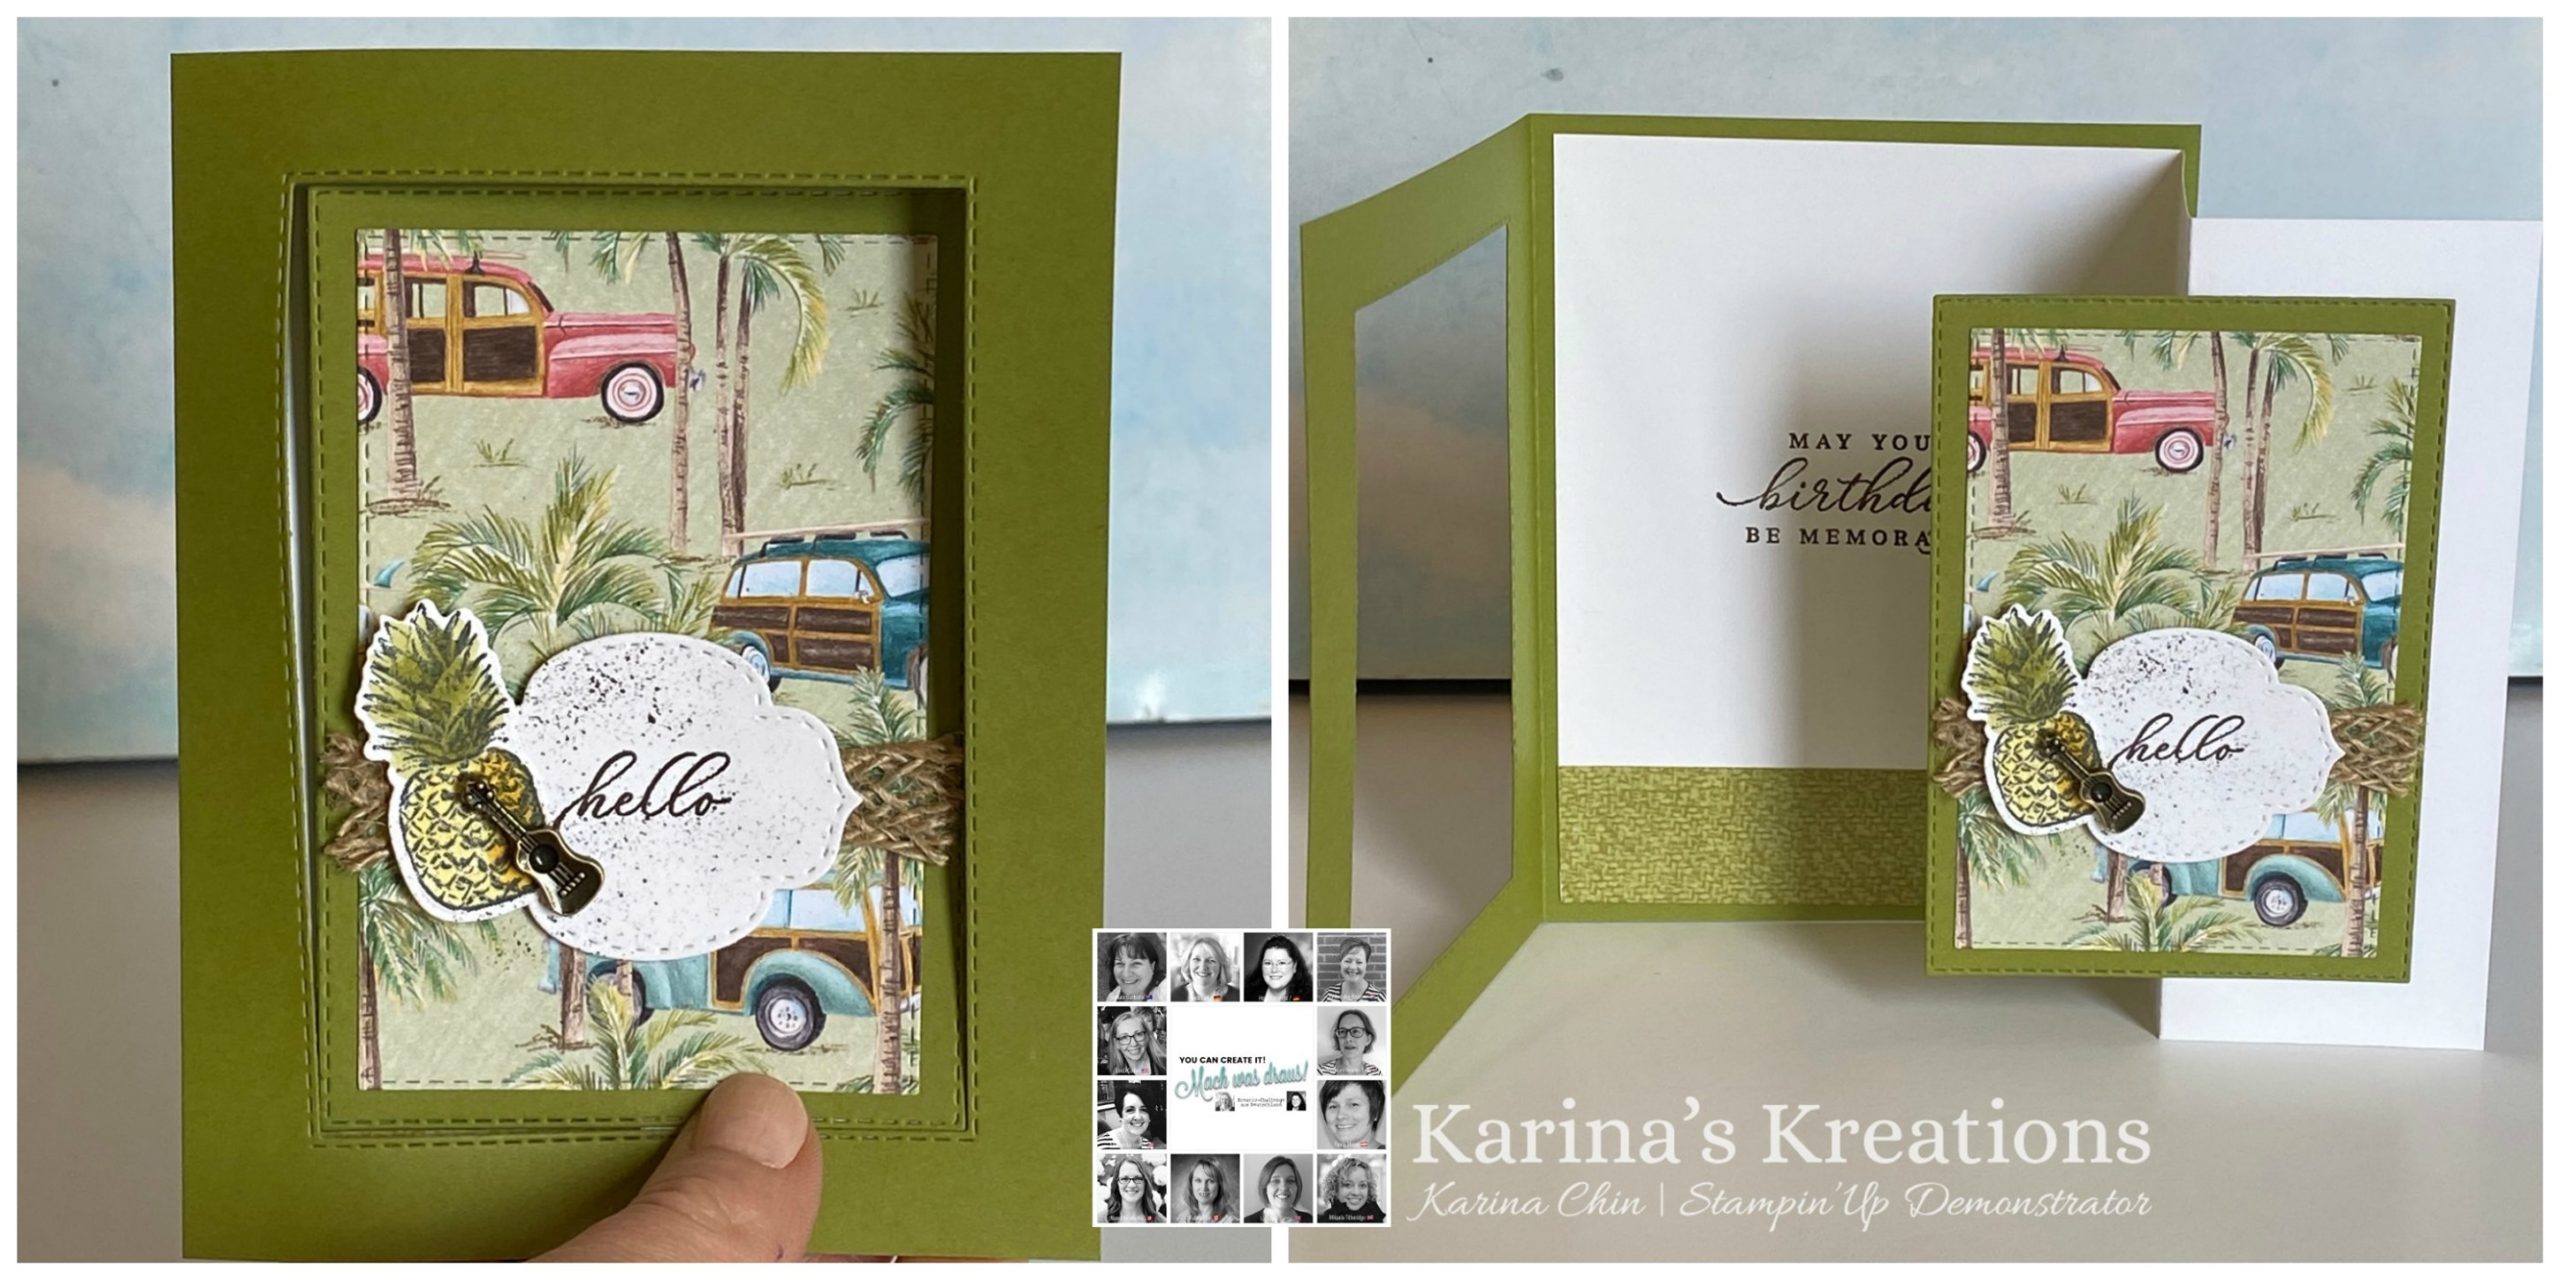 You Can Create It - International Inspiration - May 2020 | Stampin Up Demonstrator Linda Cullen | Crafty Stampin’ | Purchase your Stampin’ Up Supplies | Tropical Oasis Designer Series Paper | In The Tropics Dies | Lakeside Dies | Tropical Oasis Trinkets